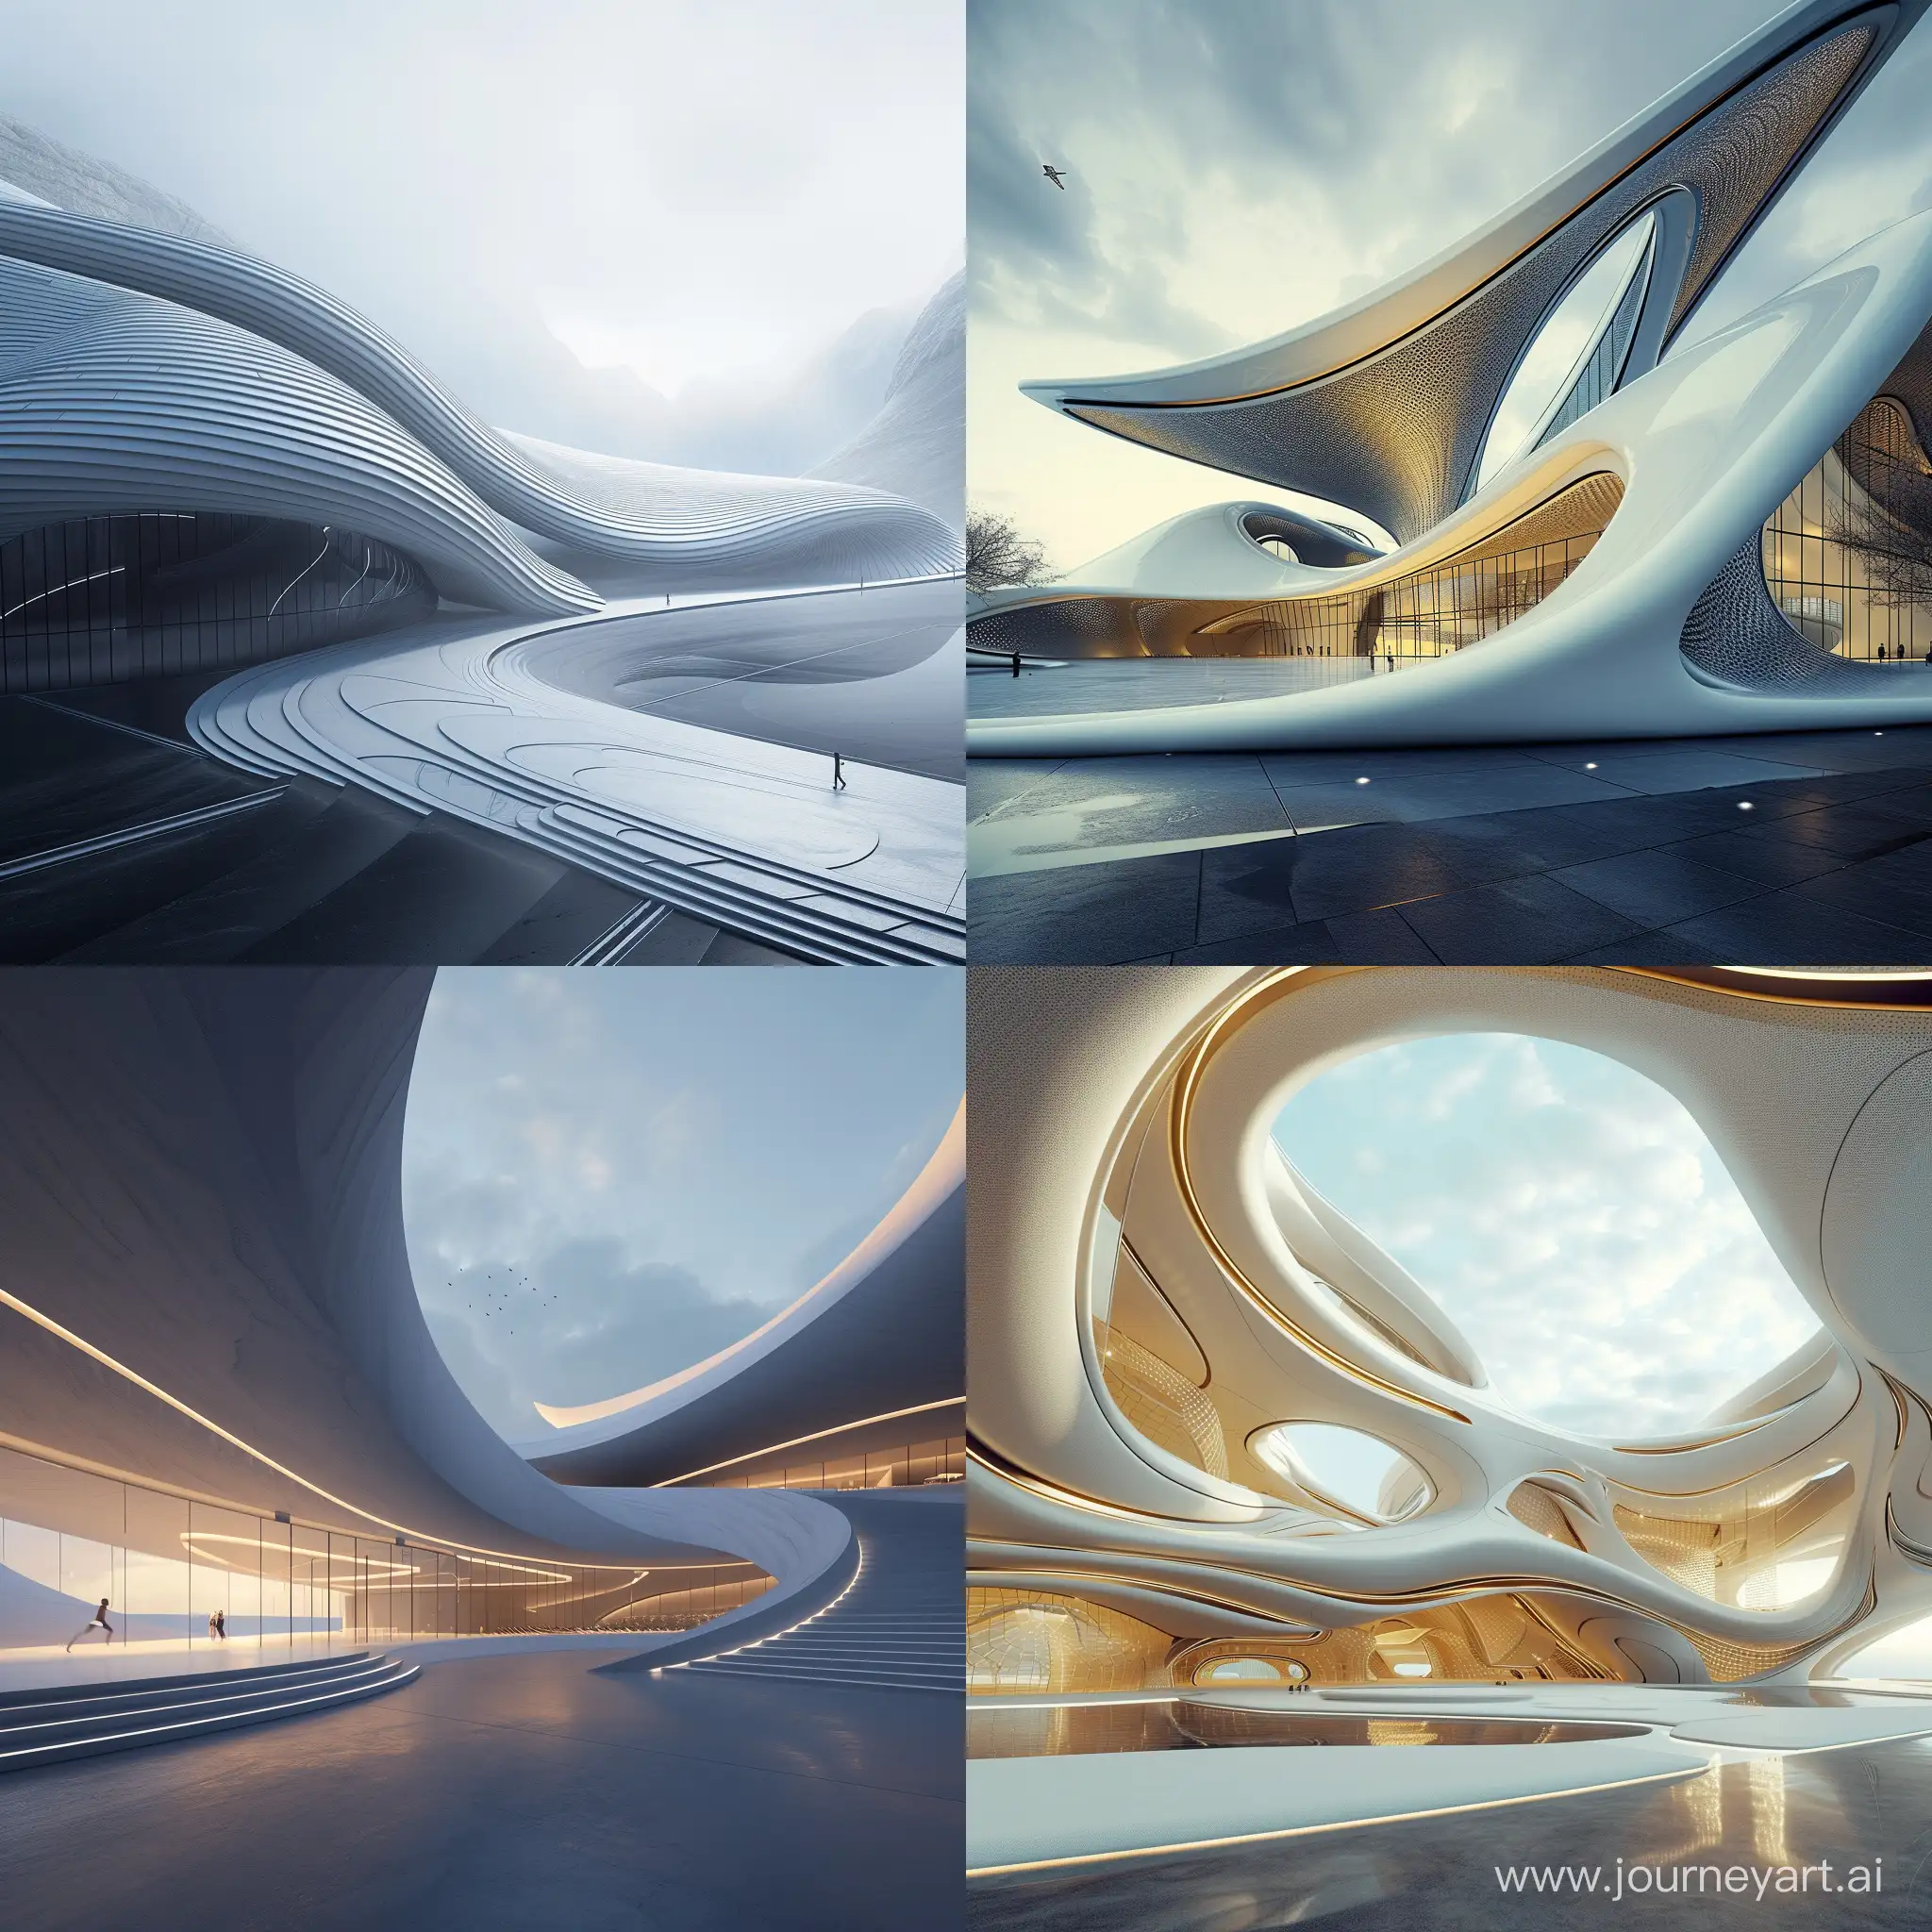 Futuristic-Parametric-Architecture-Design-Highly-Detailed-Performing-Center-with-Curve-Roof